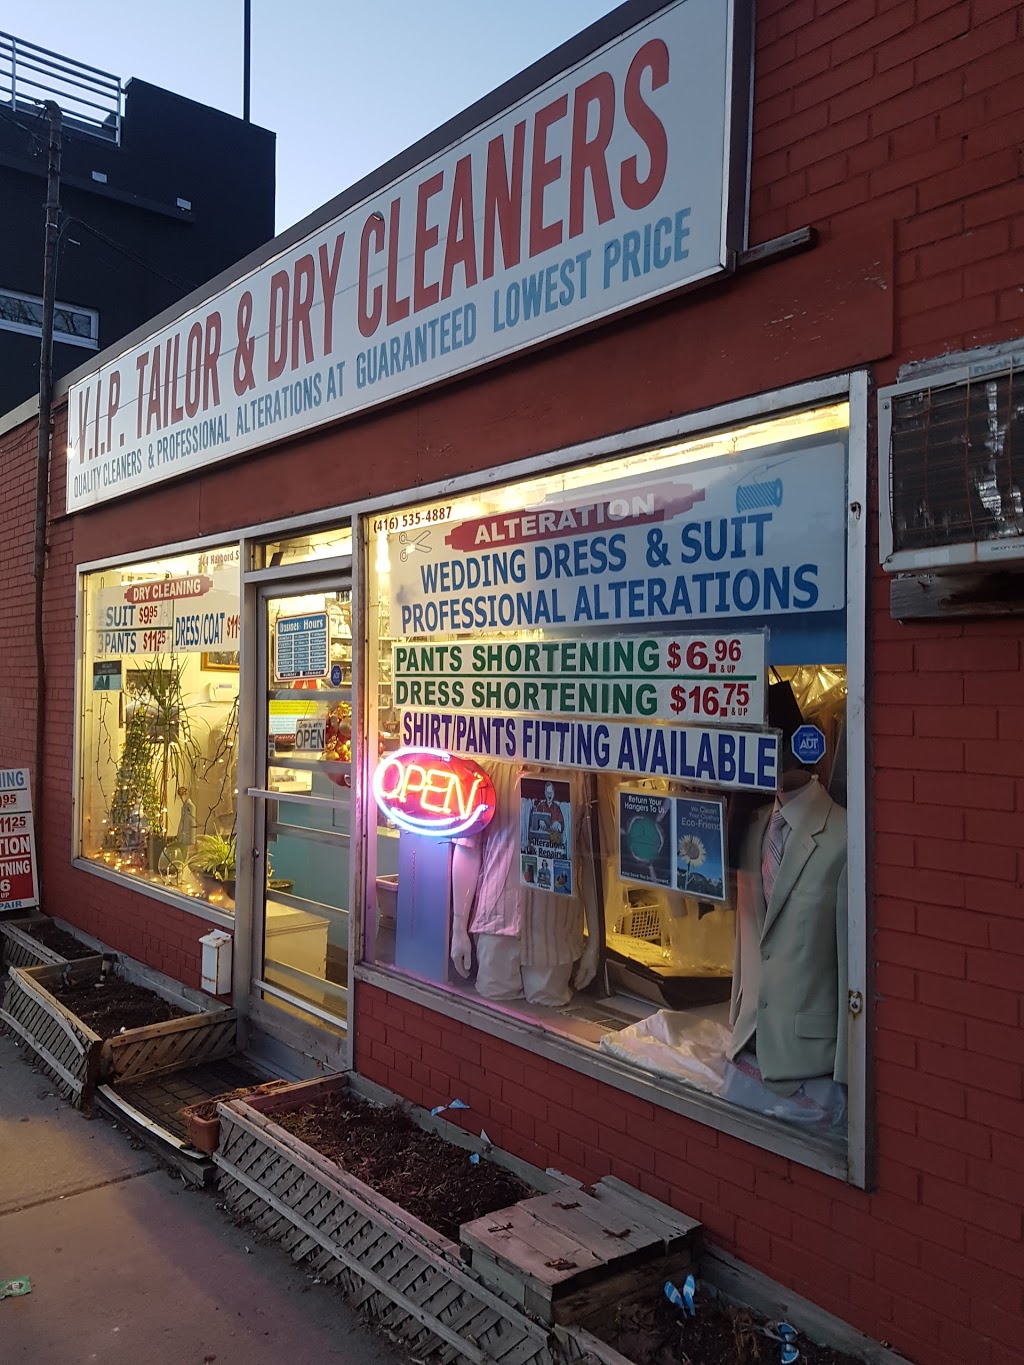 VIP Tailors & Dry Cleaners | 344 Harbord St, Toronto, ON M6G 1H4, Canada | Phone: (416) 535-4887